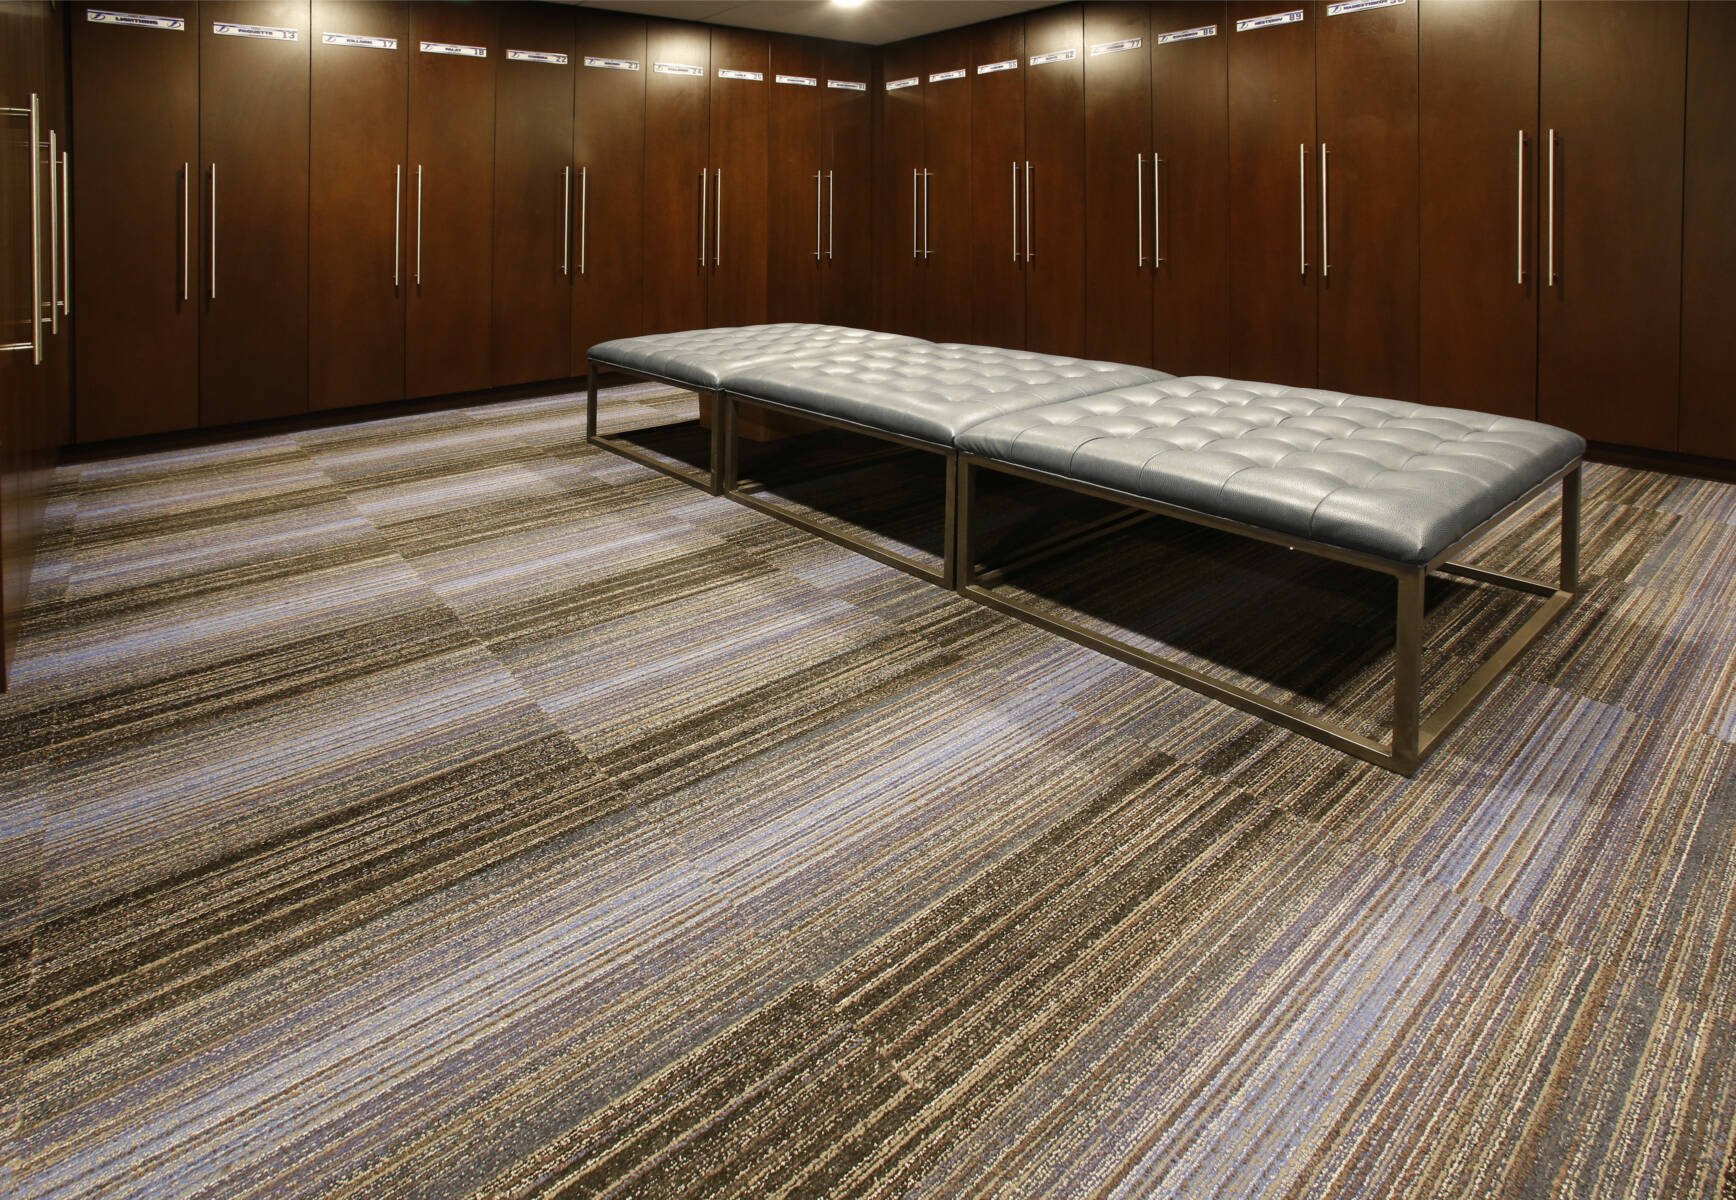 Locker room with brown and white striped carpet tile, cherry wood cabinets and white pincushion benches. This image demonstrates this company's excellence in multi-purpose sports flooring installations.